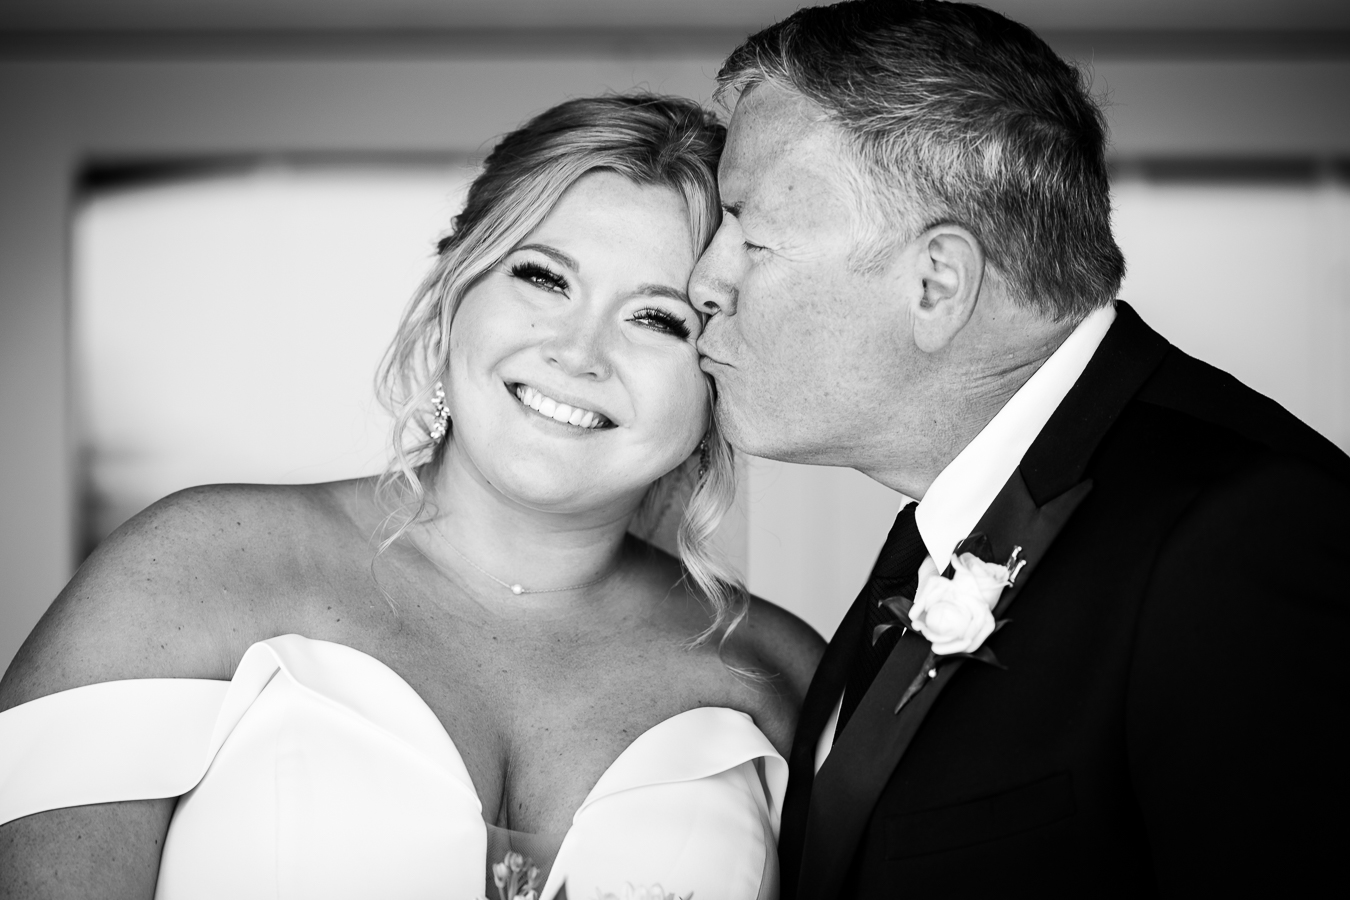 Creative, Authentic wedding photographer, lisa rhinehart, captures this black and white image of the bride with her father as she leans into him while he kisses her cheek during the father daughter first look before the wedding ceremony at Middleburg Barn 